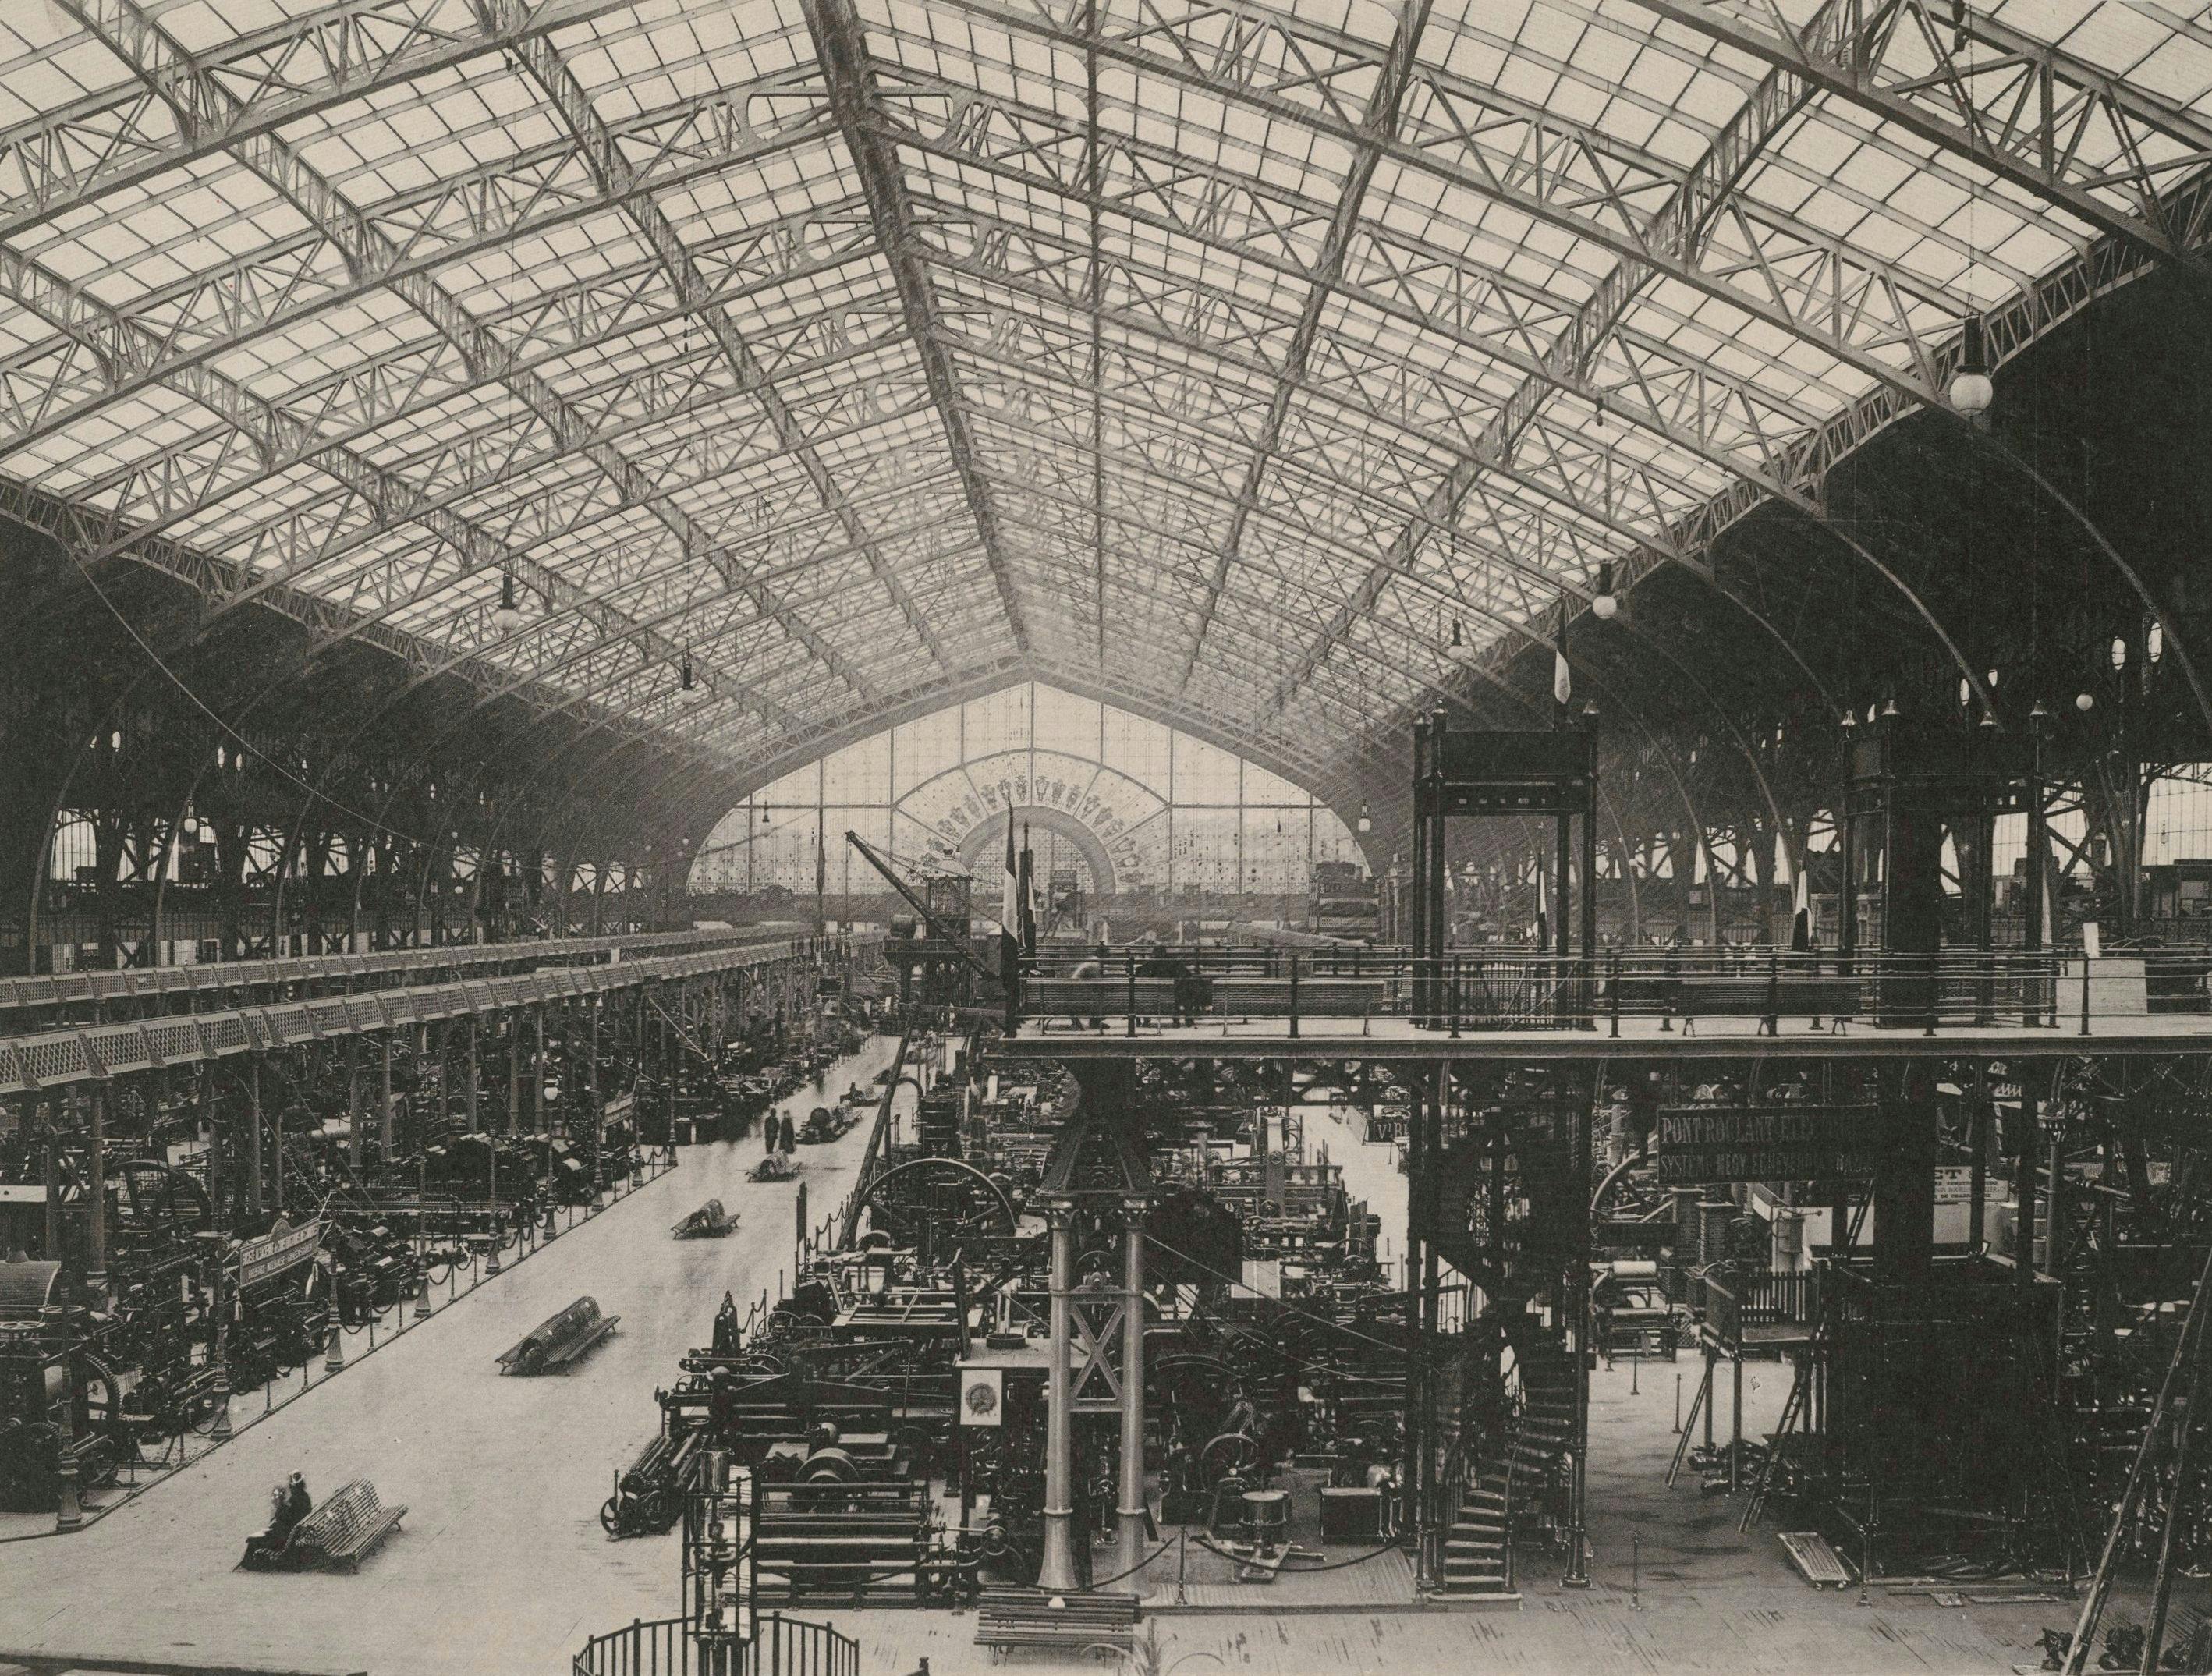 Inside view of the Galerie des machines, 1889. Used for the World Expo of 1900. Brown University Library. Collection: Paris Capital of the 19th Century 